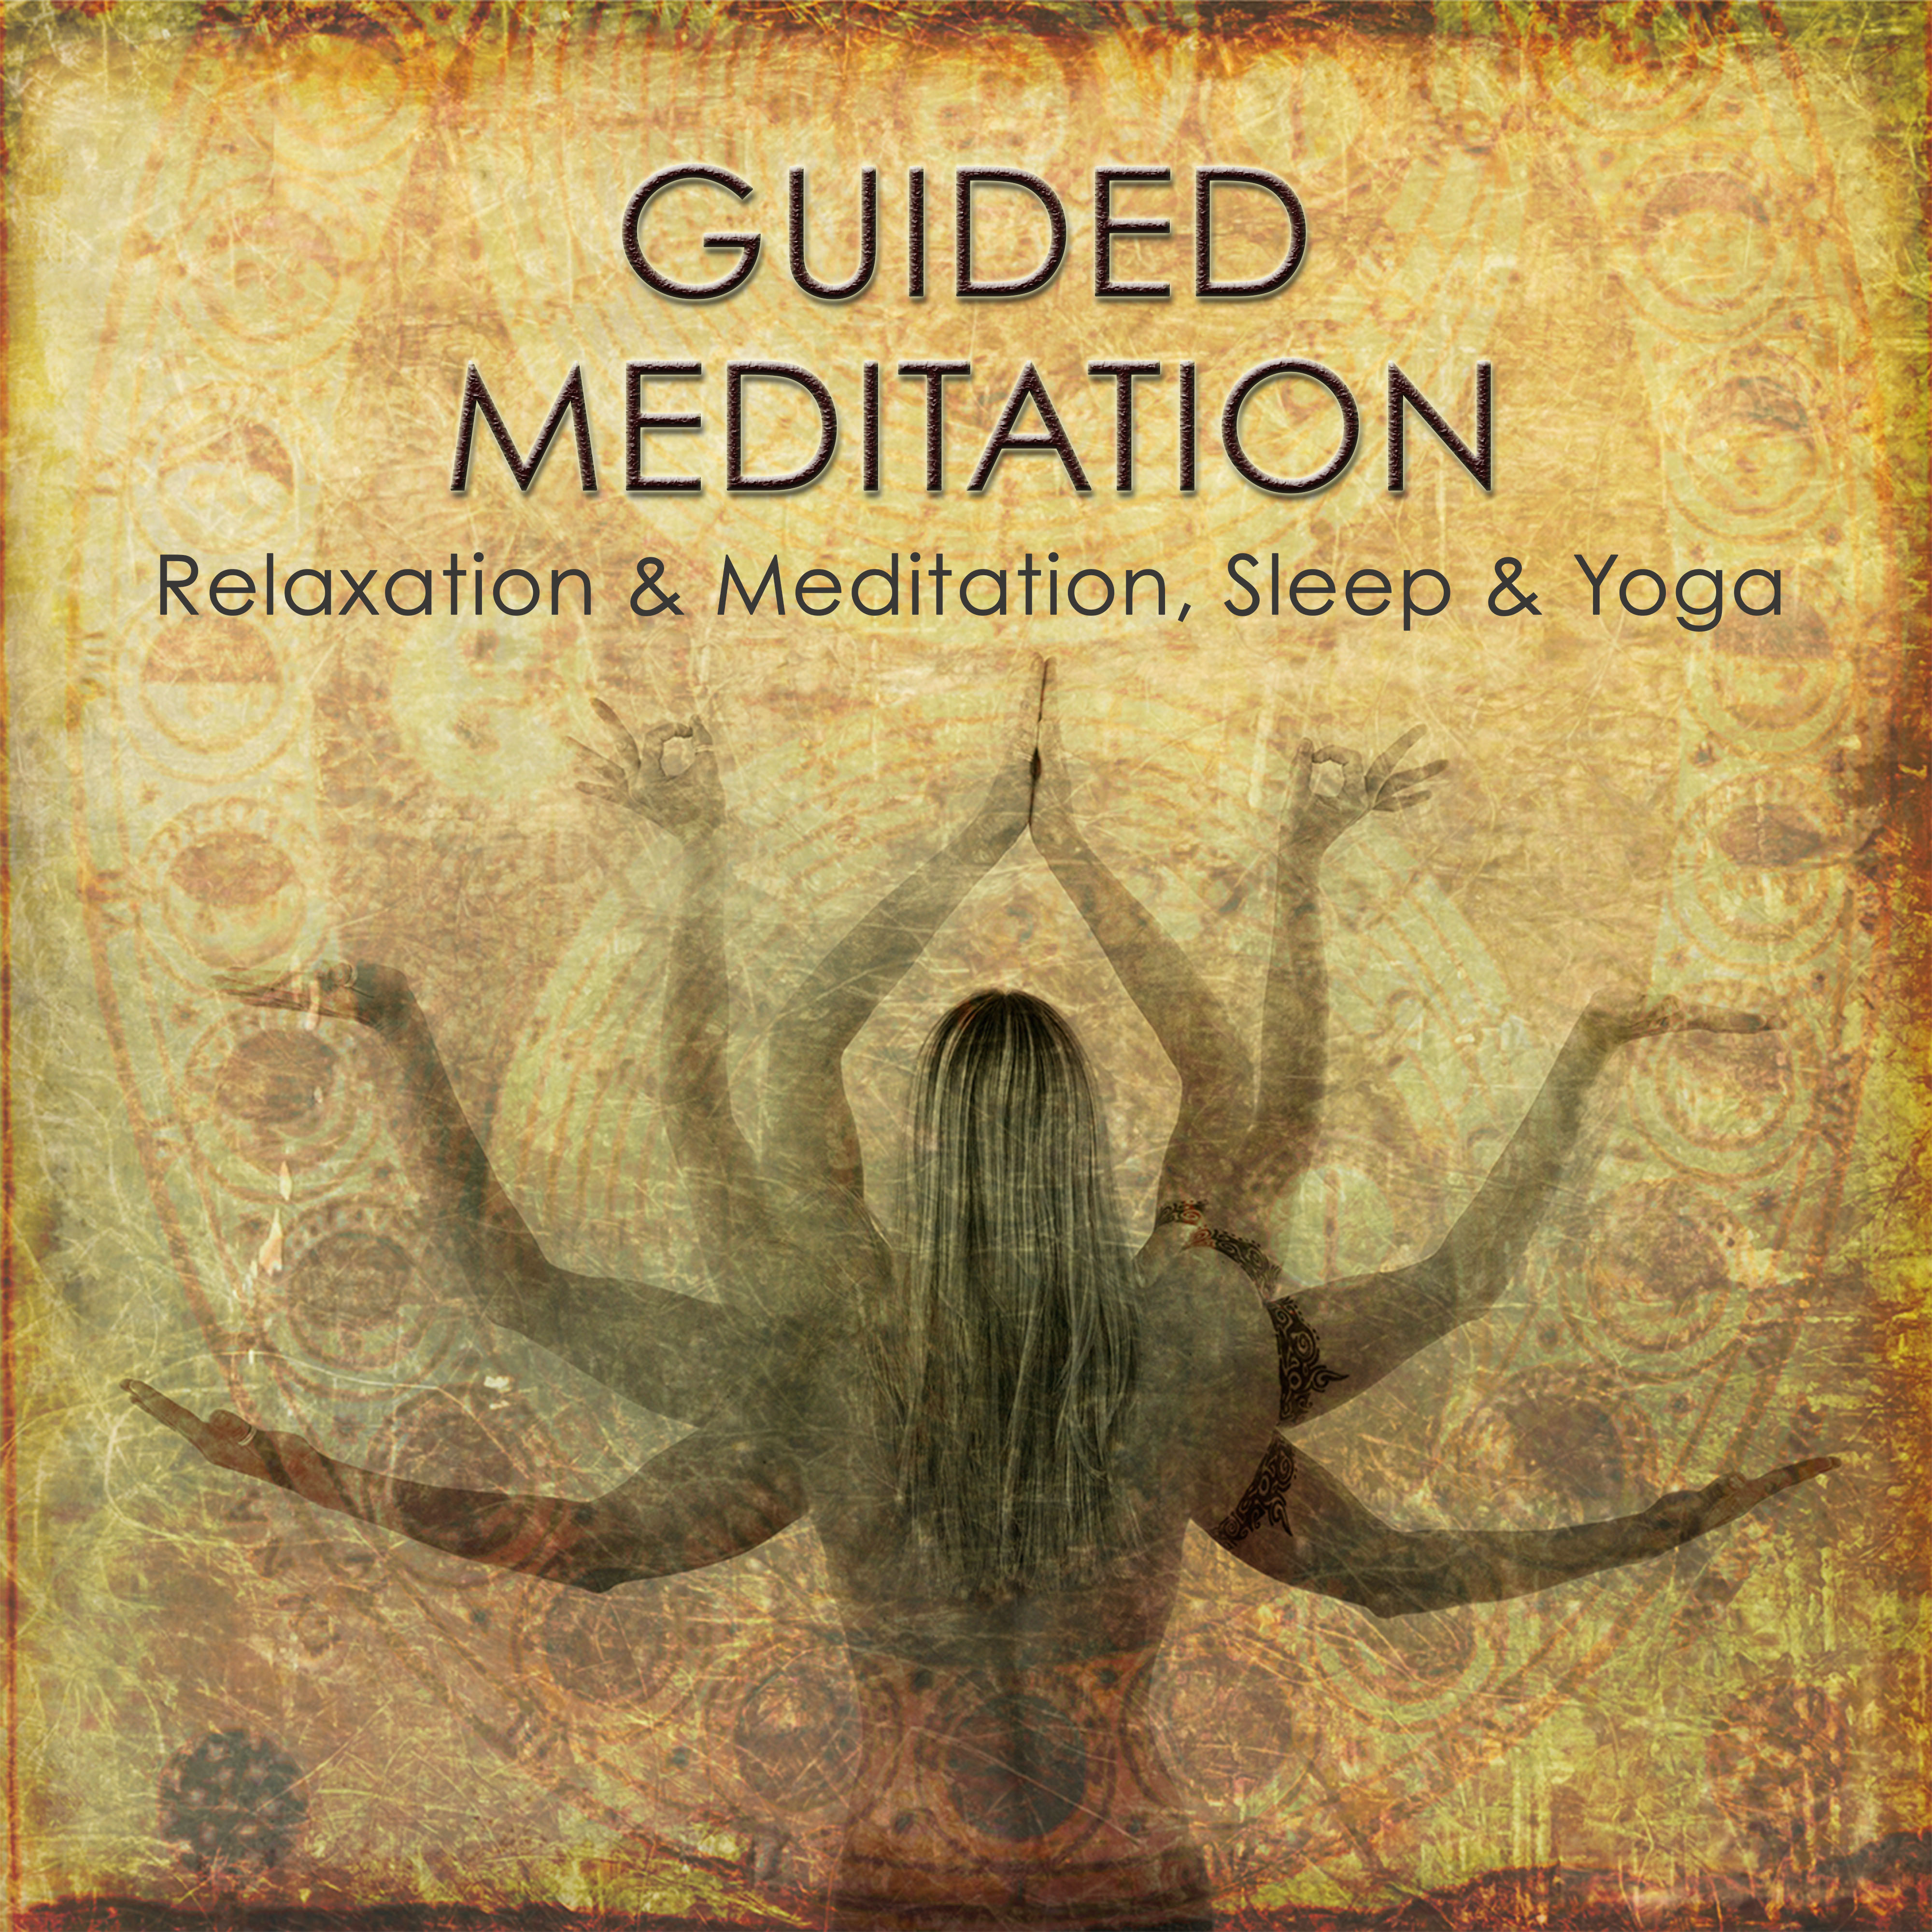 Guided Meditation & Healing Music for Relaxation and Anxiety